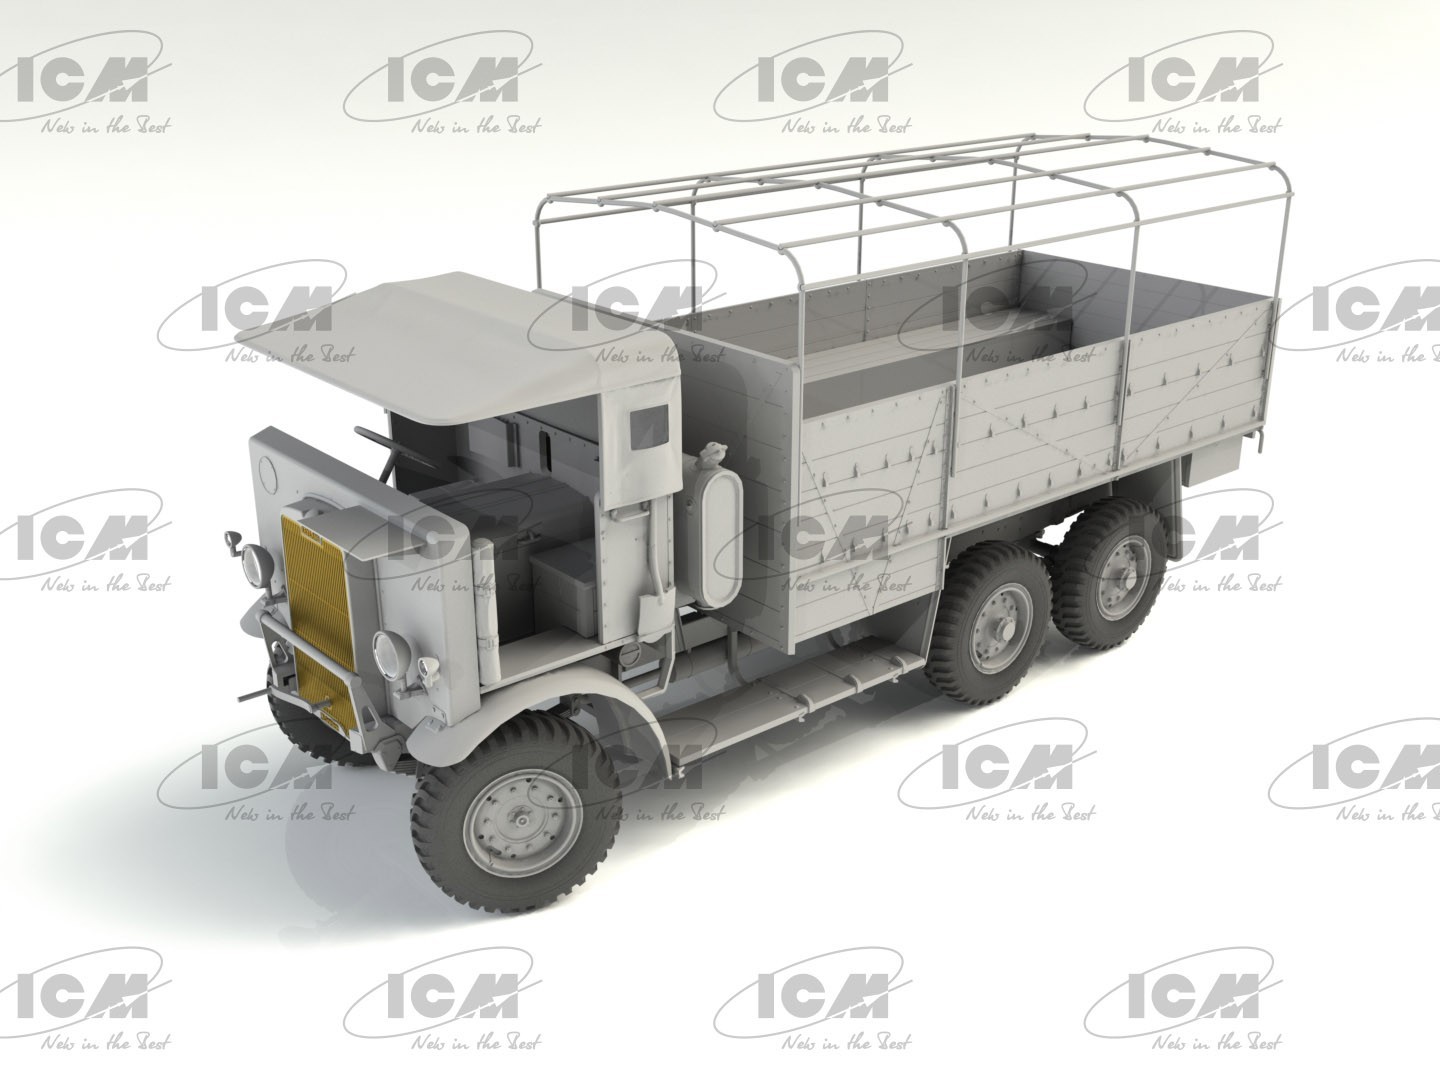 Leyland Retriever General Service (early production), WWII British Truck